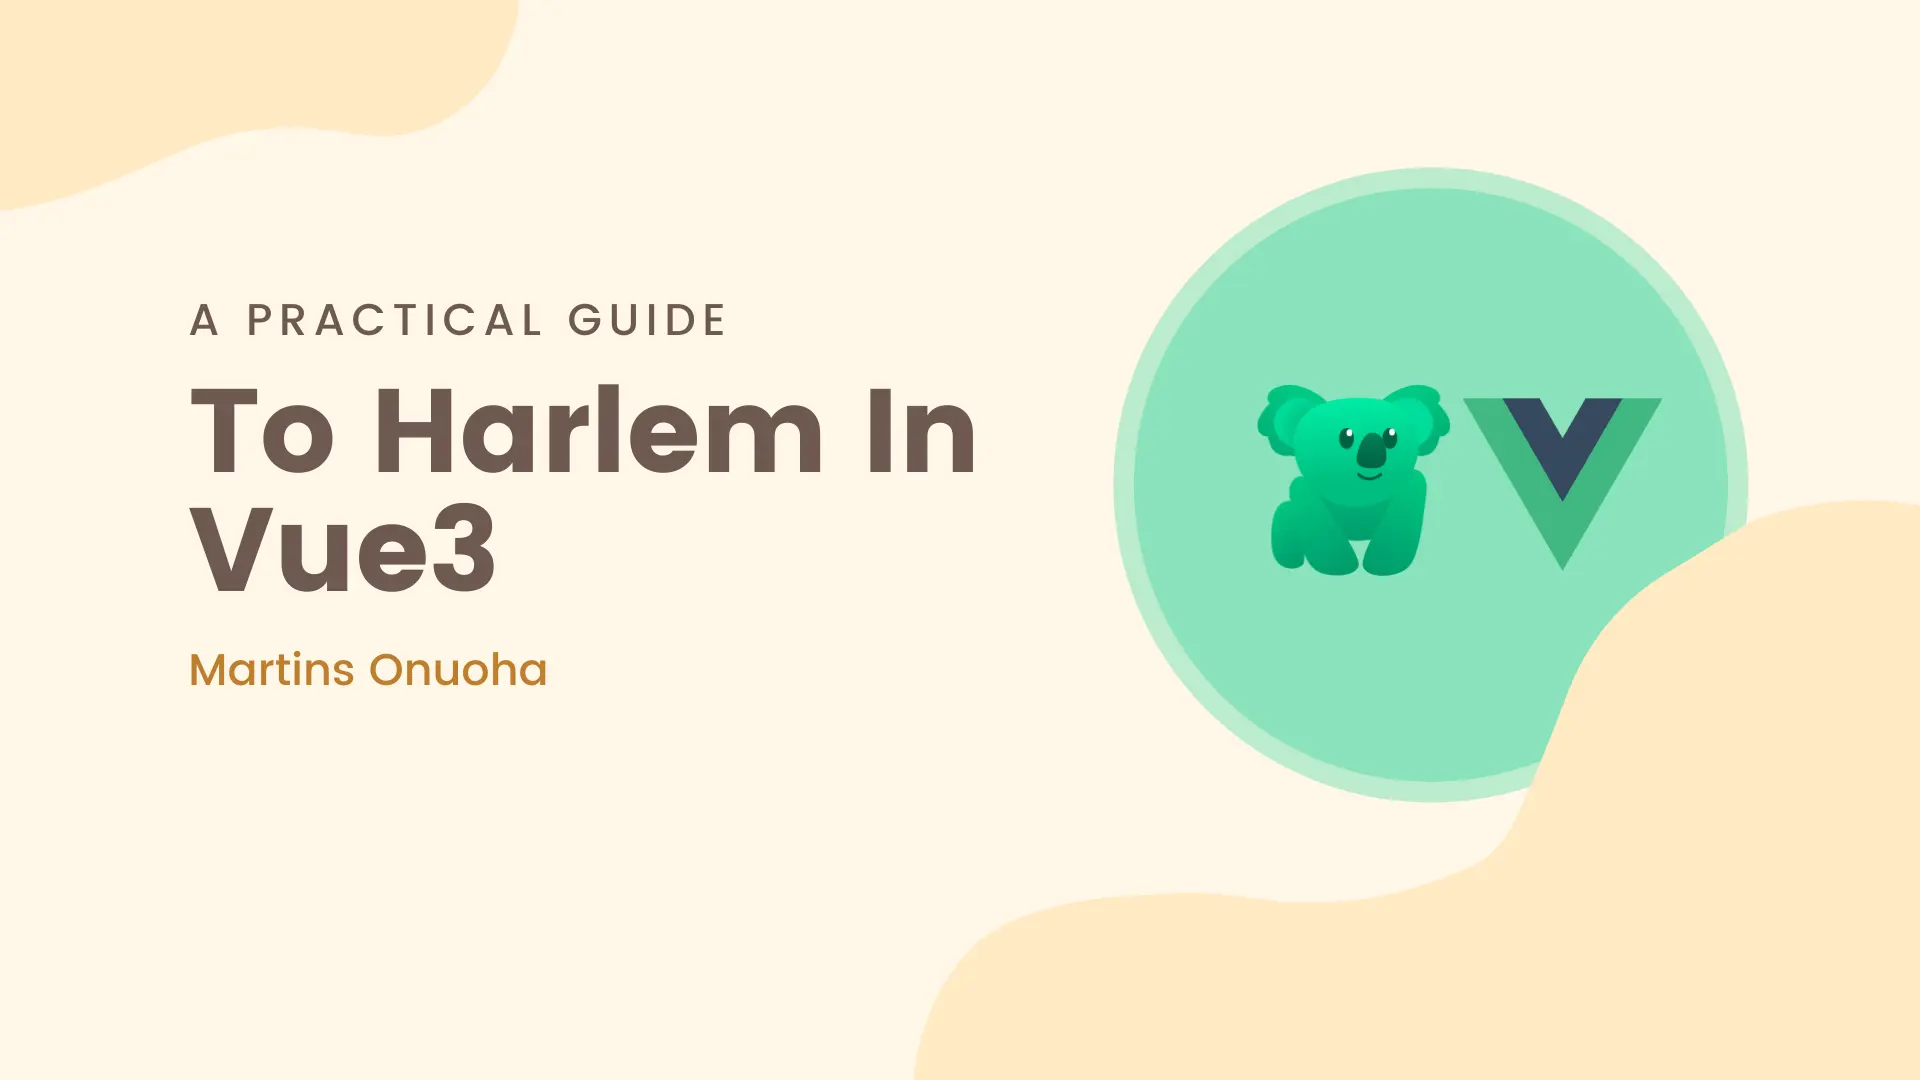 A Practical Guide to Harlem